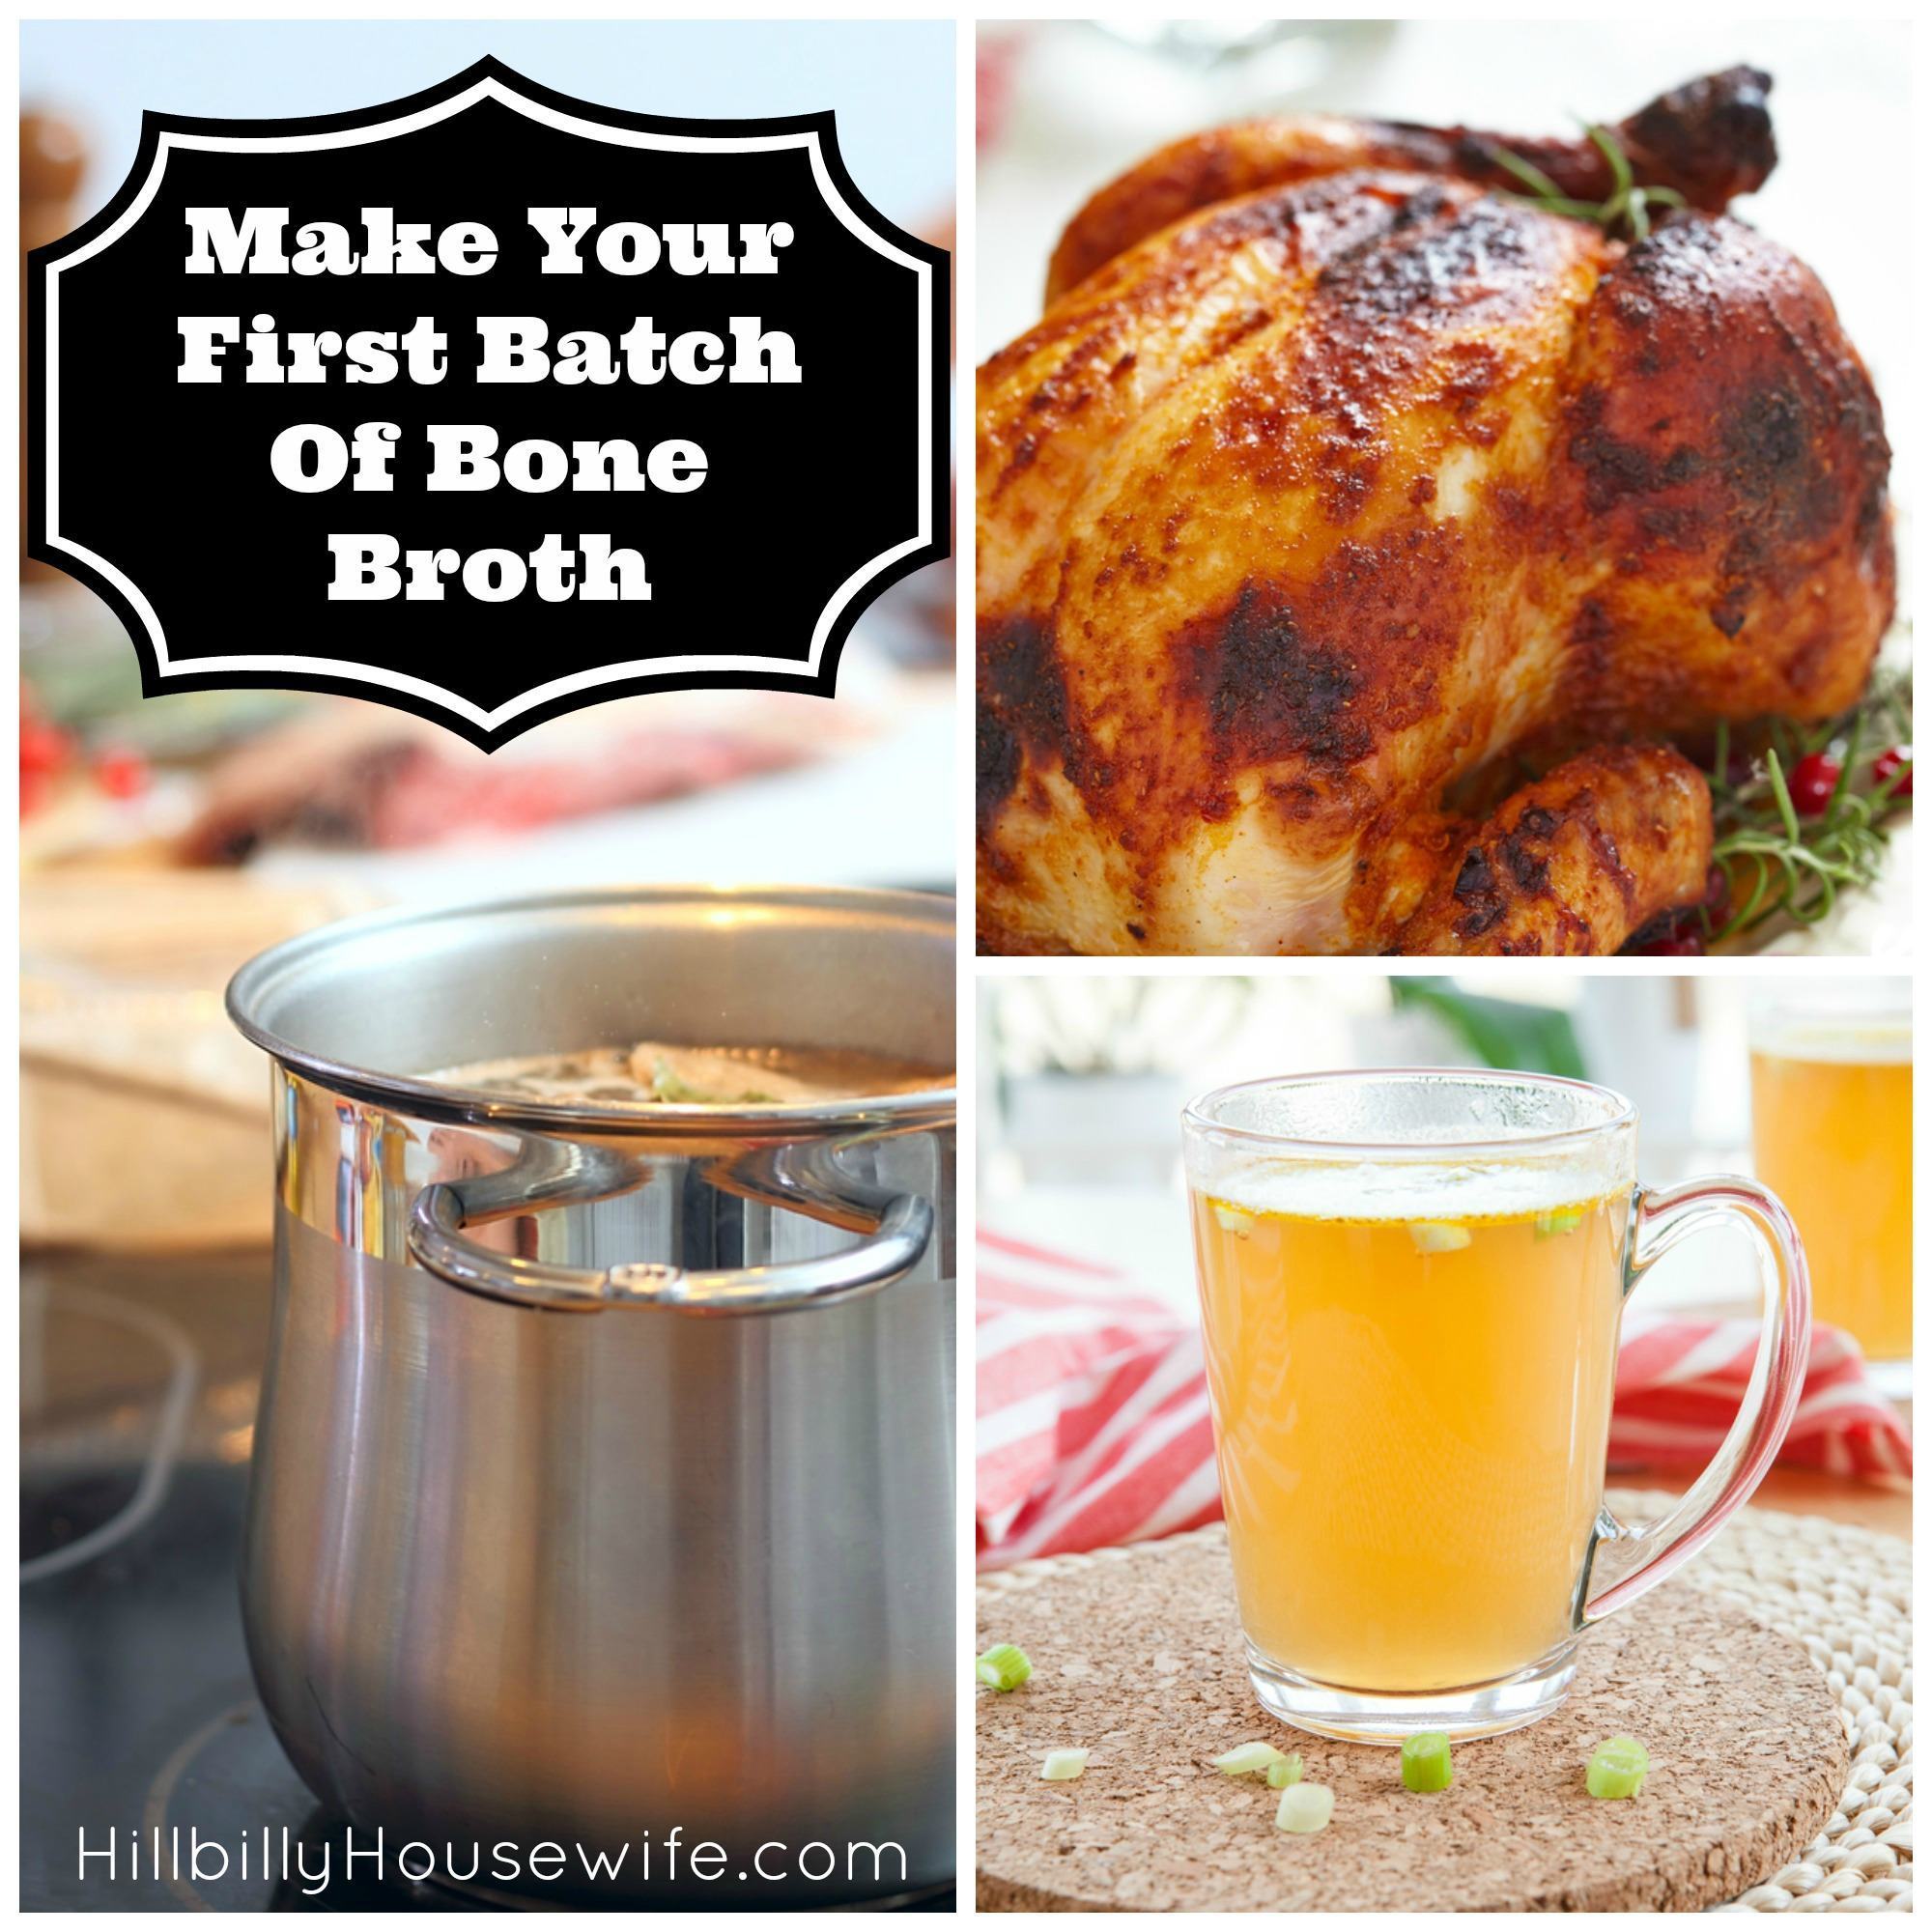 Not sure how to make that bone broth every one's taking about? Here's an easy step-by-step tutorial. All you need is the leftovers from a roasted chicken (or a rotisserie chicken from the grocery store) and a big pot. 